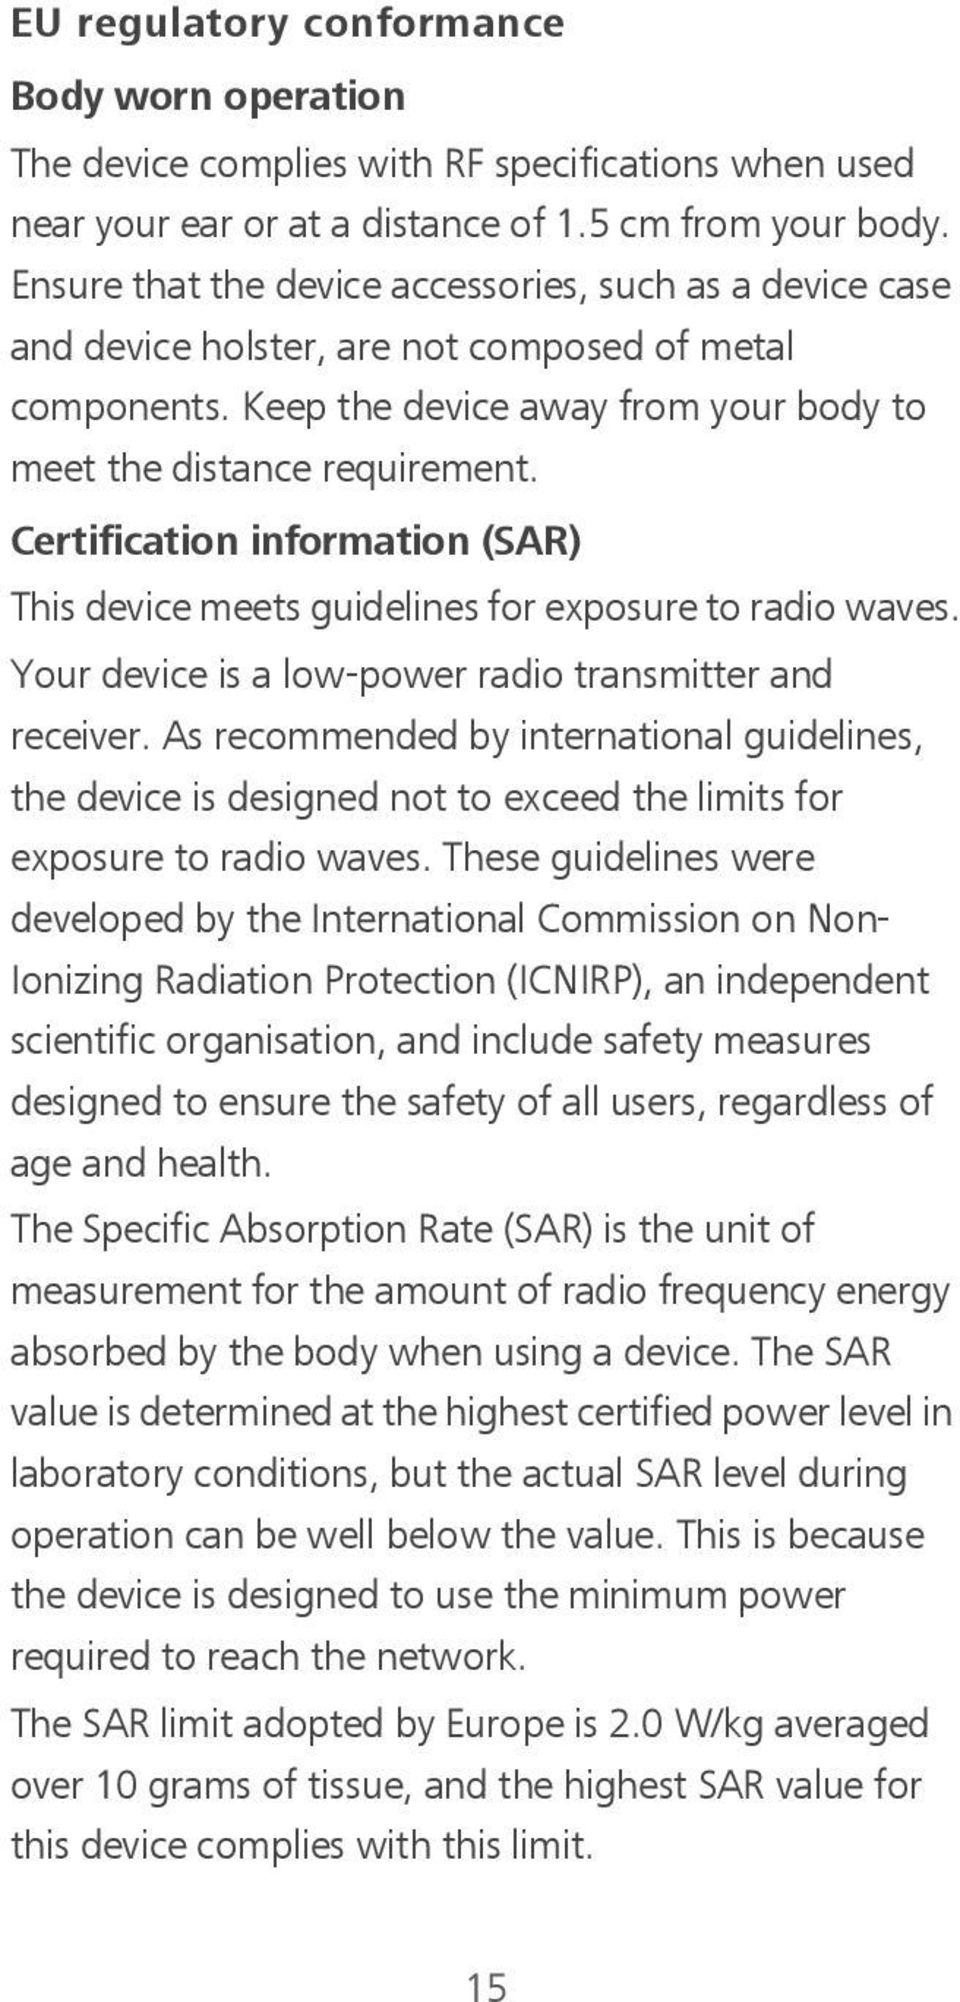 Certification information (SAR) This device meets guidelines for exposure to radio waves. Your device is a low-power radio transmitter and receiver.